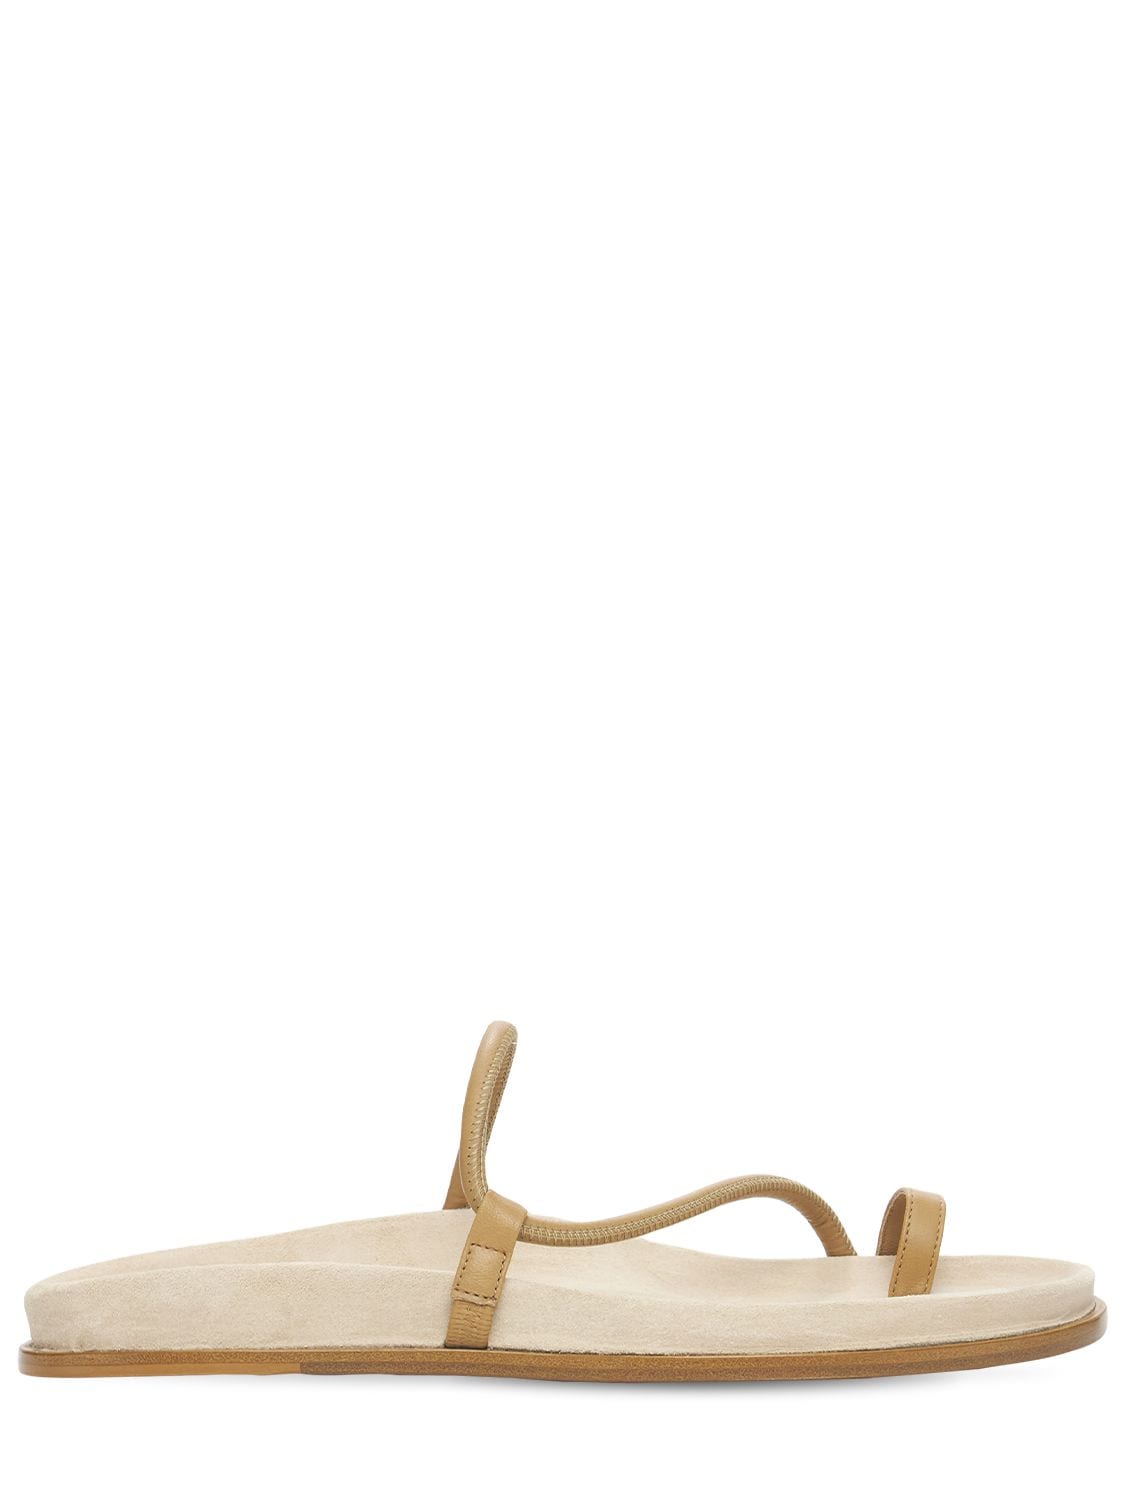 Emme Parsons 10mm Bari Leather Thong Sandals In Tan | ModeSens